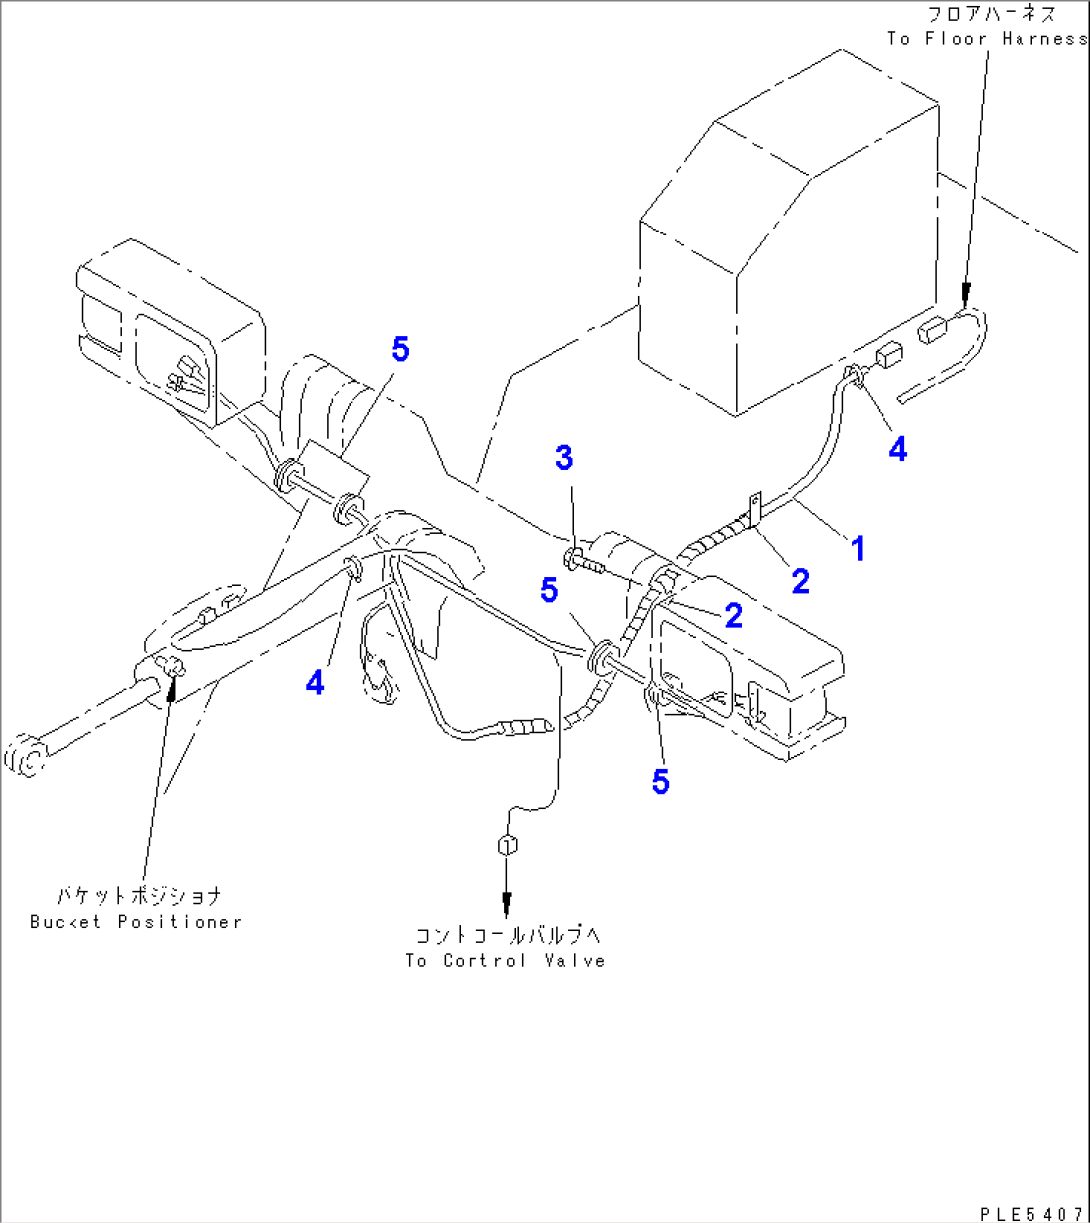 WIRING HARNESS (FRONT FRAME LINE)